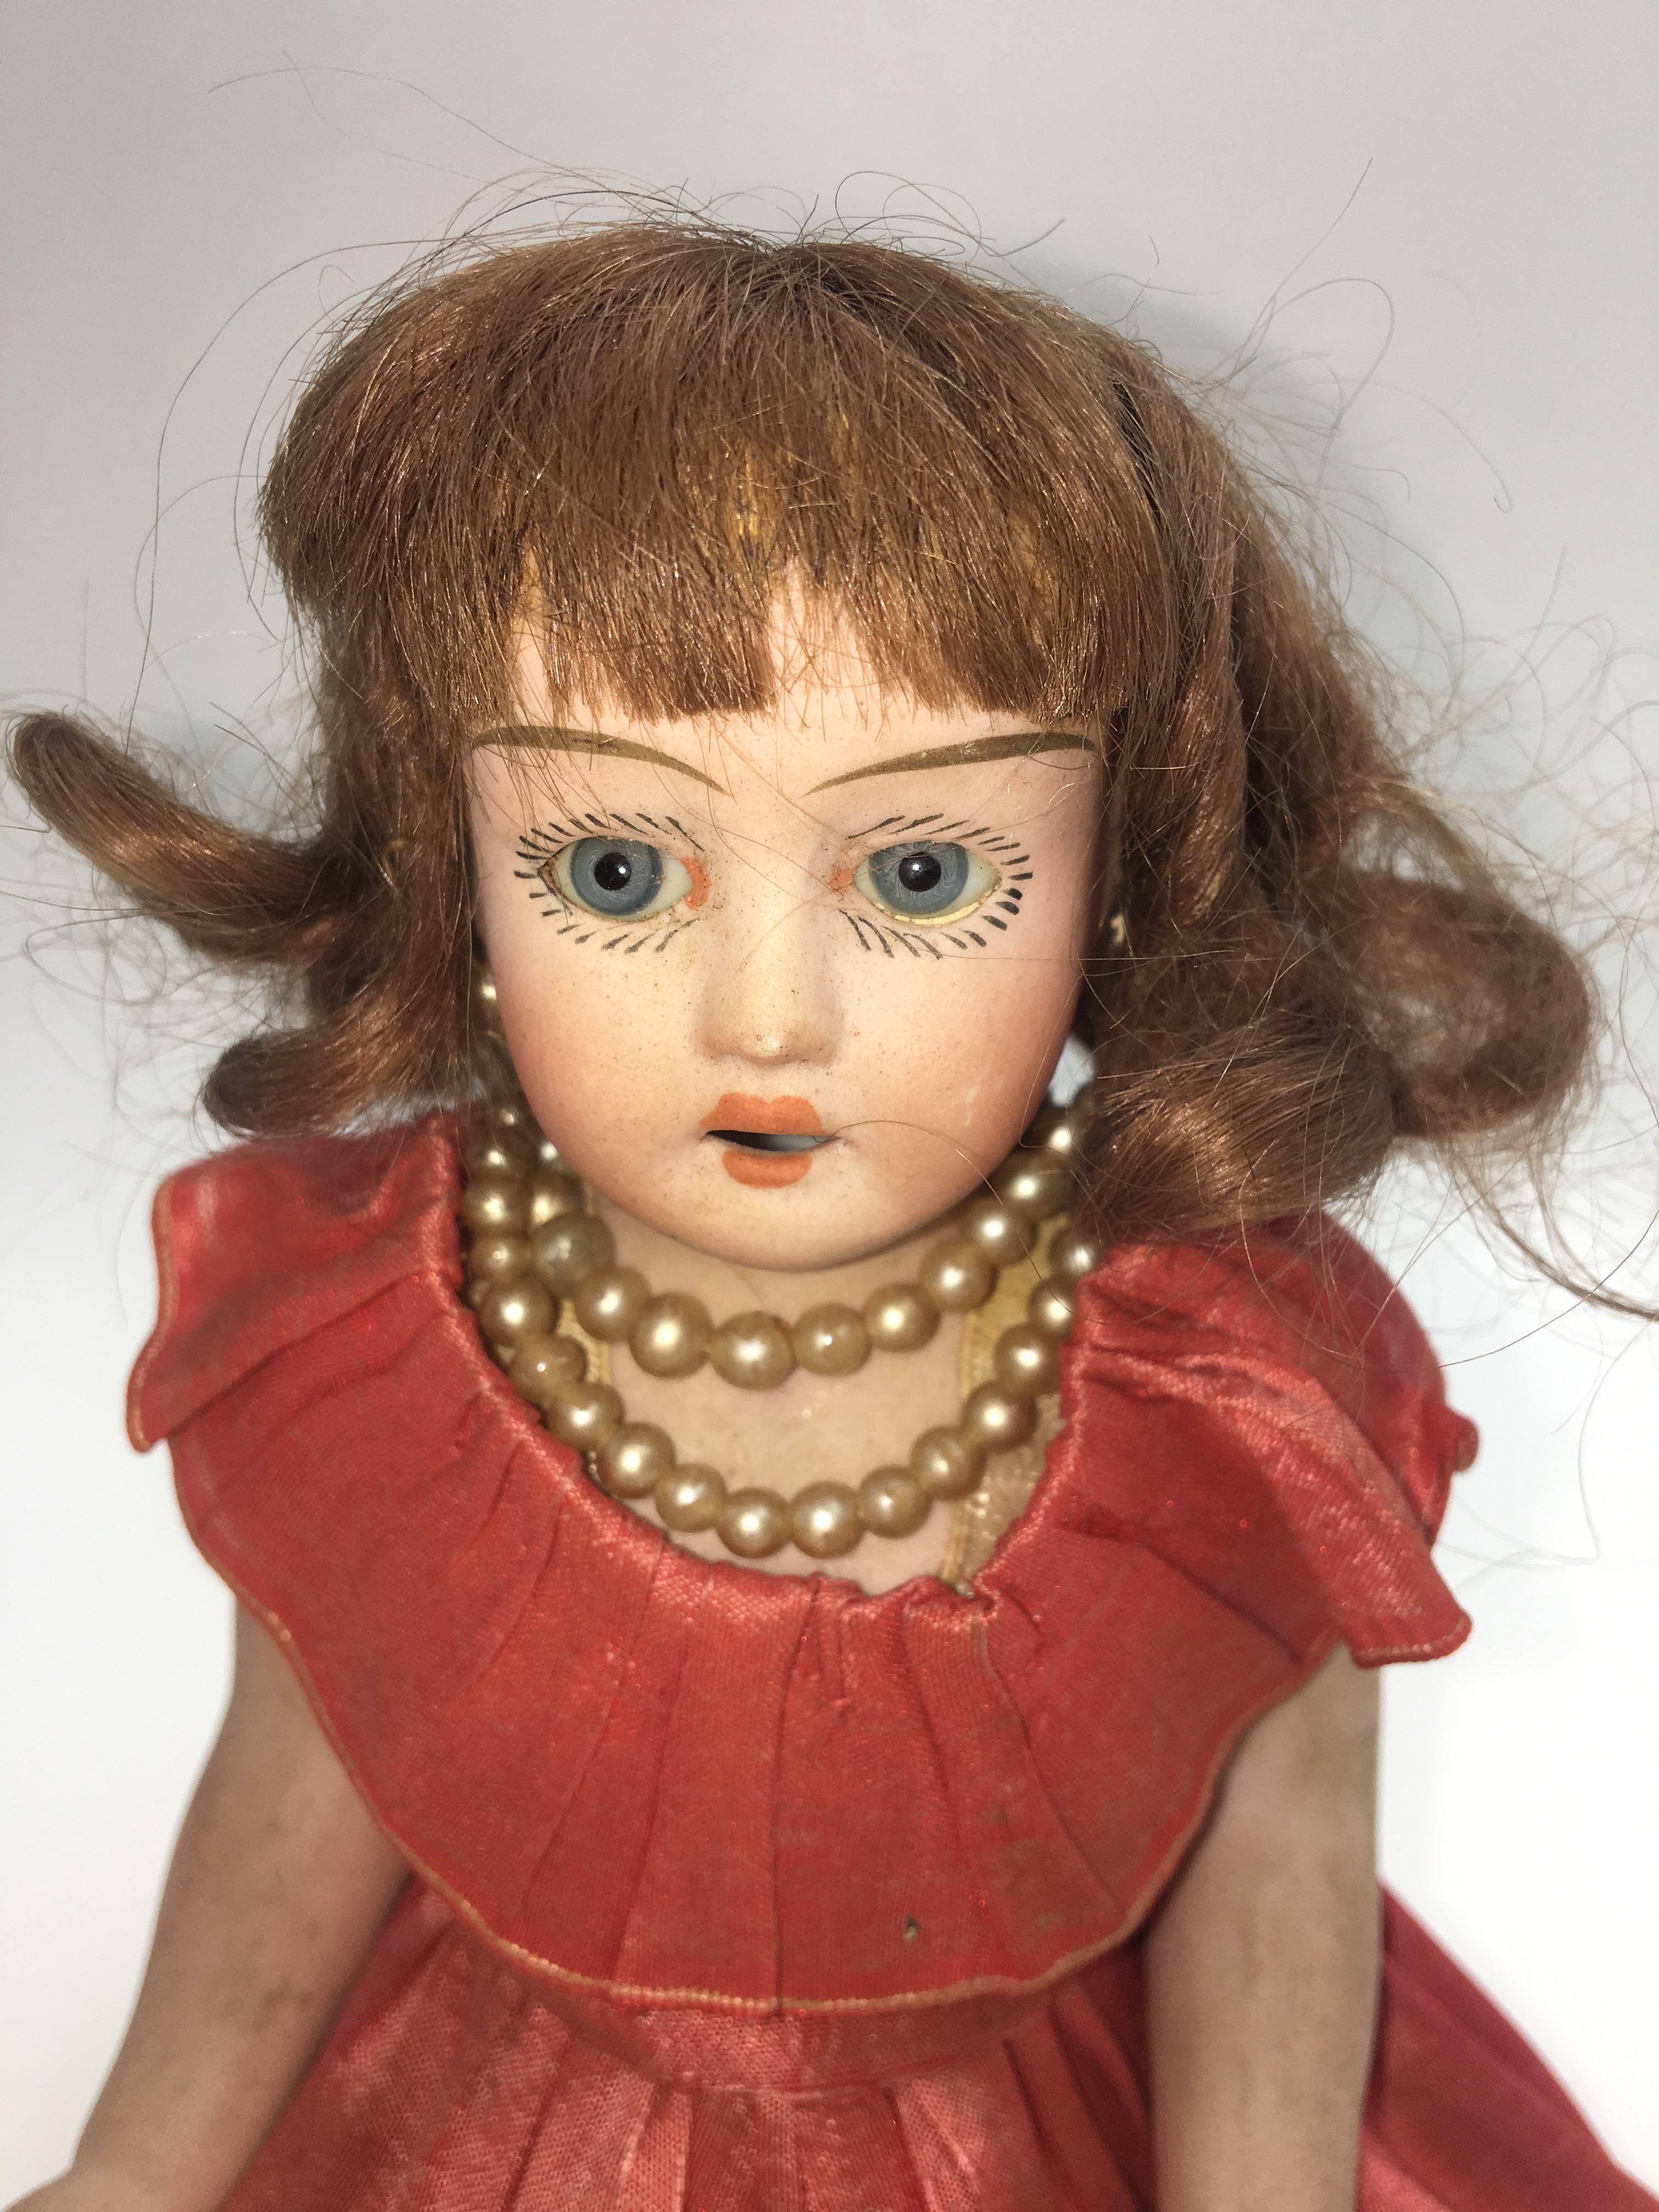 Old Bisque ceramic doll of the twentieth century.
Short dress in red fabric with champagne lace petticoat, necklace in period style.